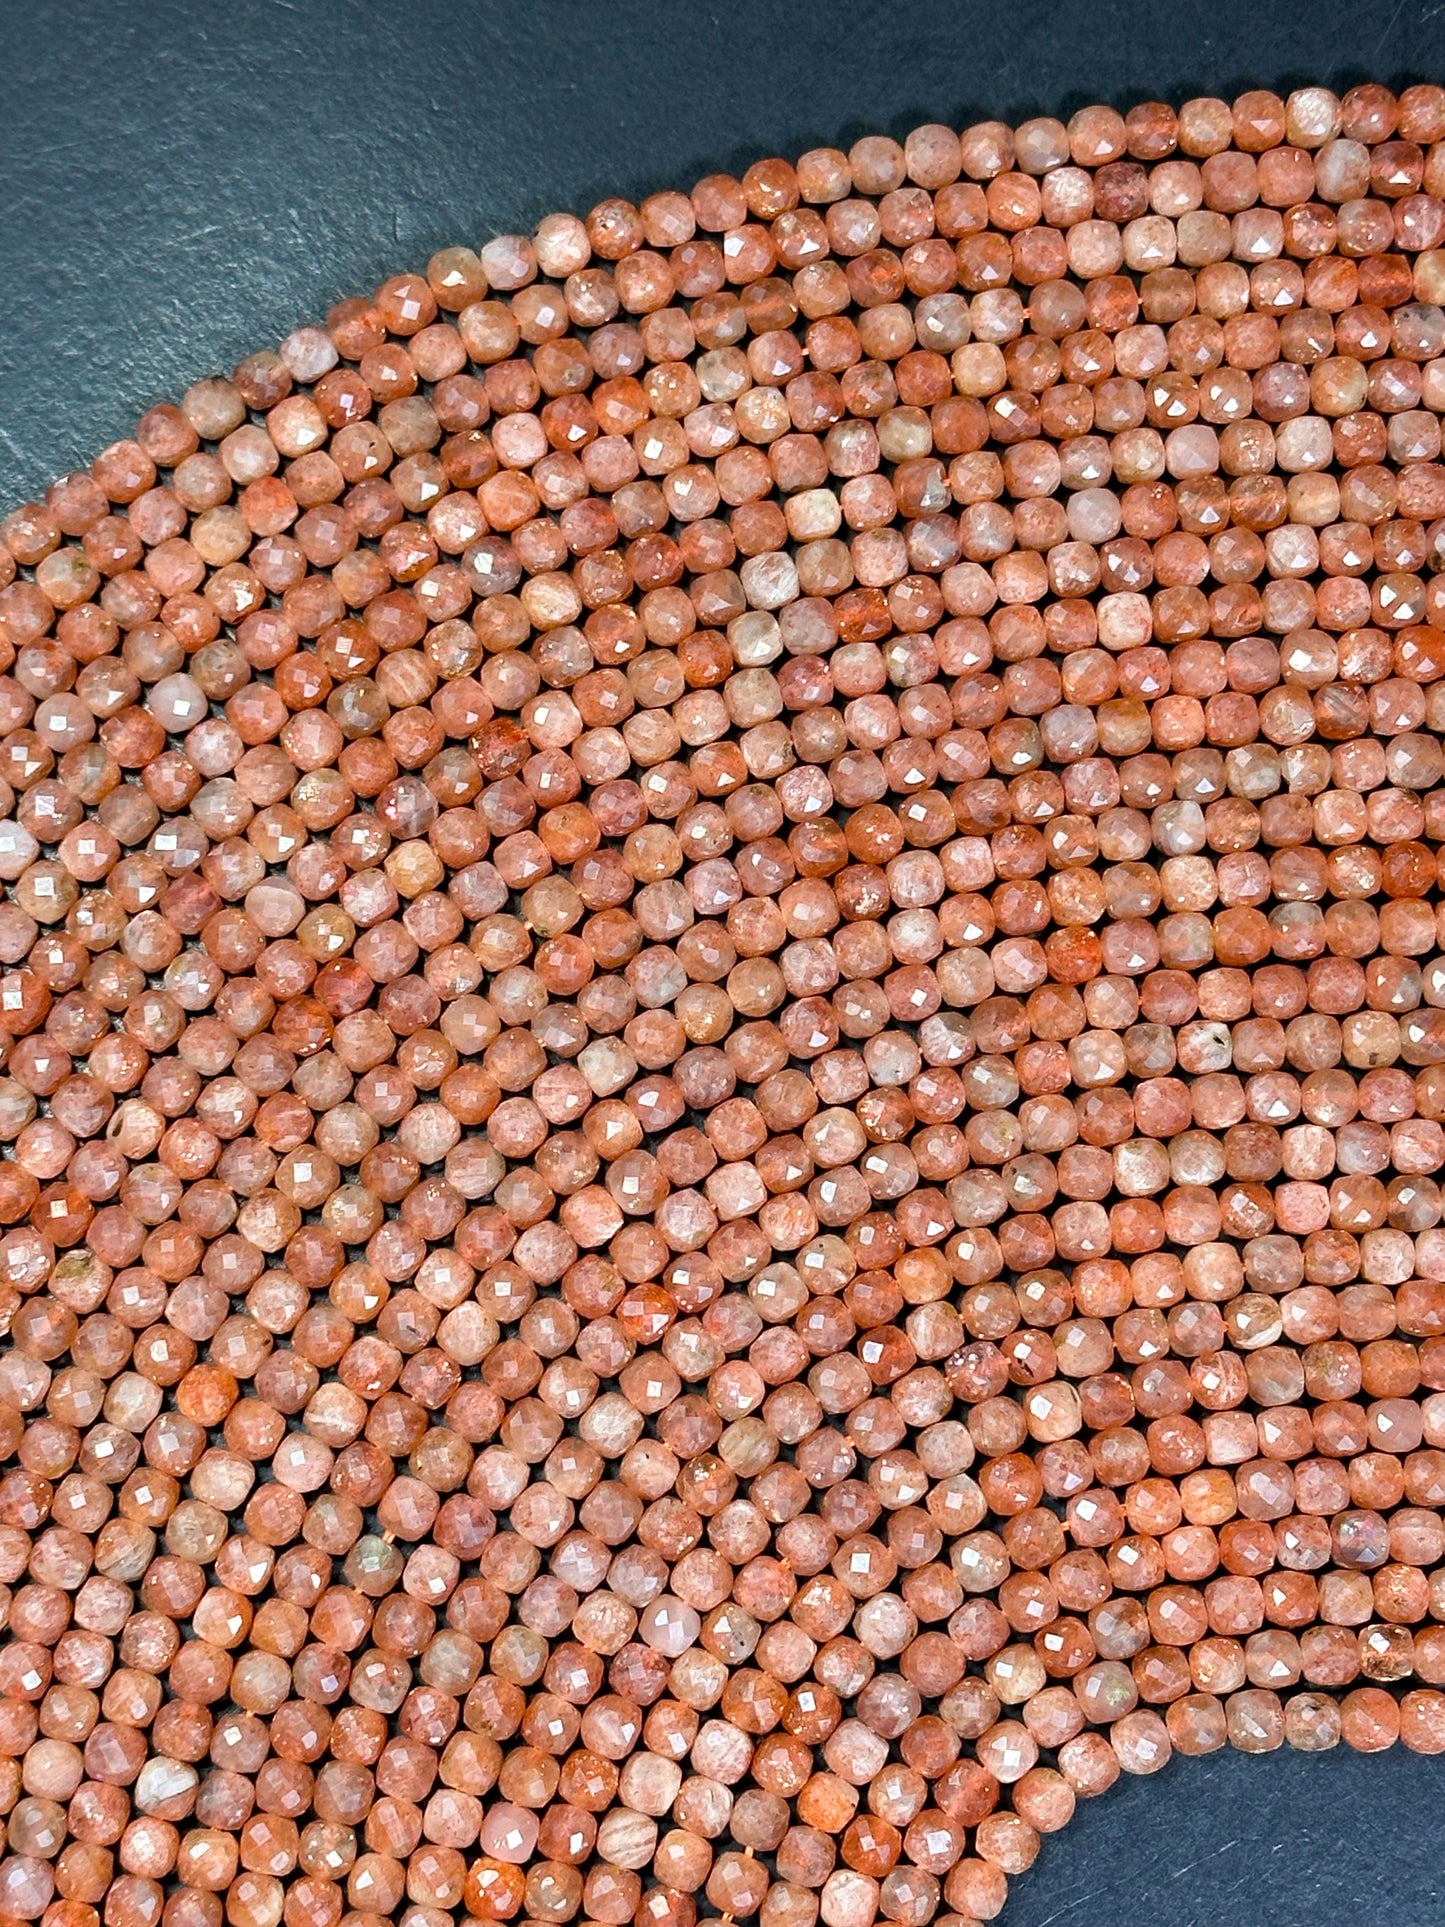 Natural Fire Sunstone Gemstone Bead Faceted 4.5-5mm Cube Shape Bead, Gorgeous Natural Orange Color Fire Sunstone Great Quality Gemstone Bead 15.5"